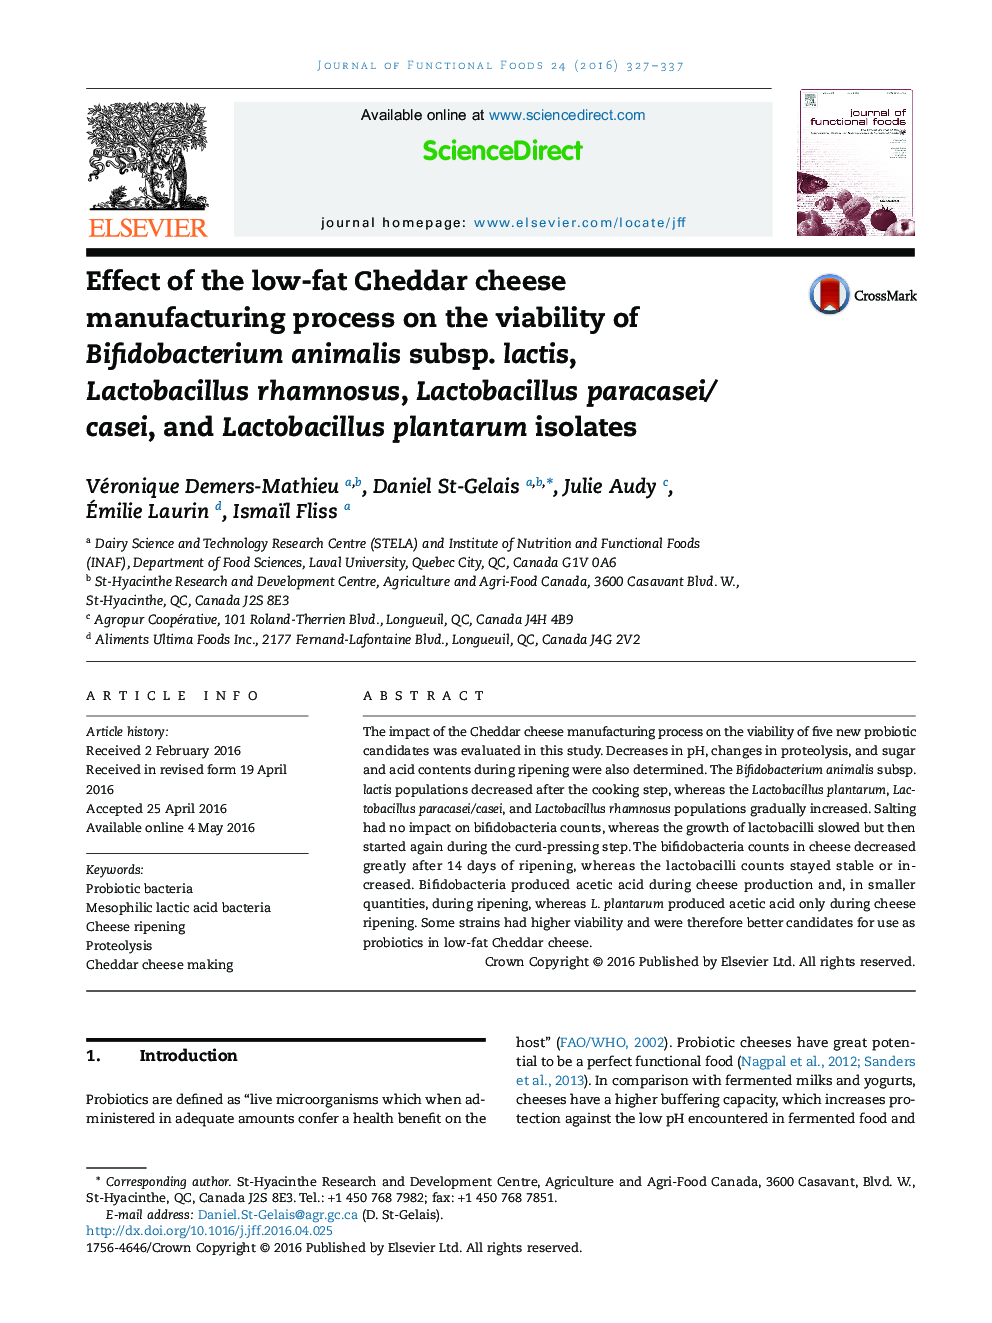 Effect of the low-fat Cheddar cheese manufacturing process on the viability of Bifidobacterium animalis subsp. lactis, Lactobacillus rhamnosus, Lactobacillus paracasei/casei, and Lactobacillus plantarum isolates